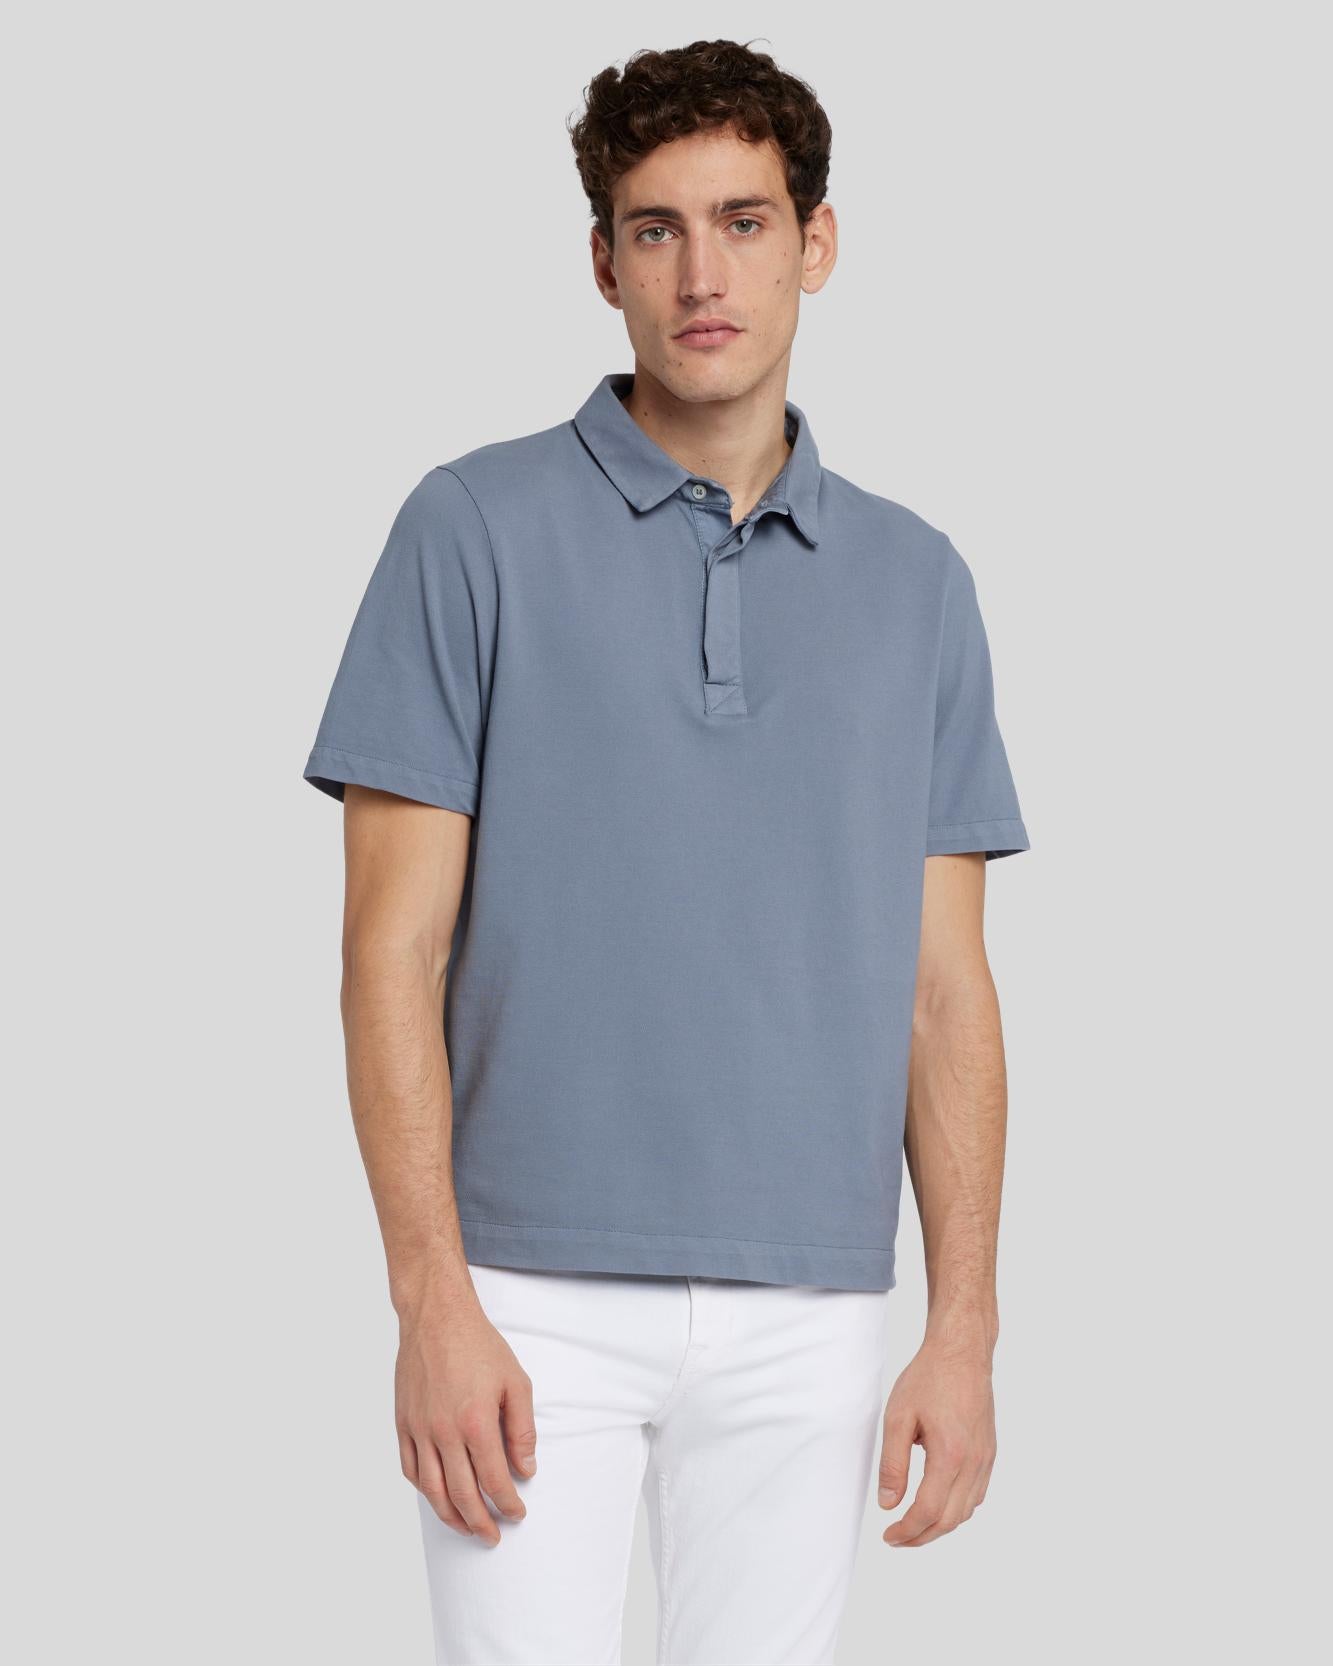 Pique Knit Polo in Dusty Blue | 7 For All Mankind